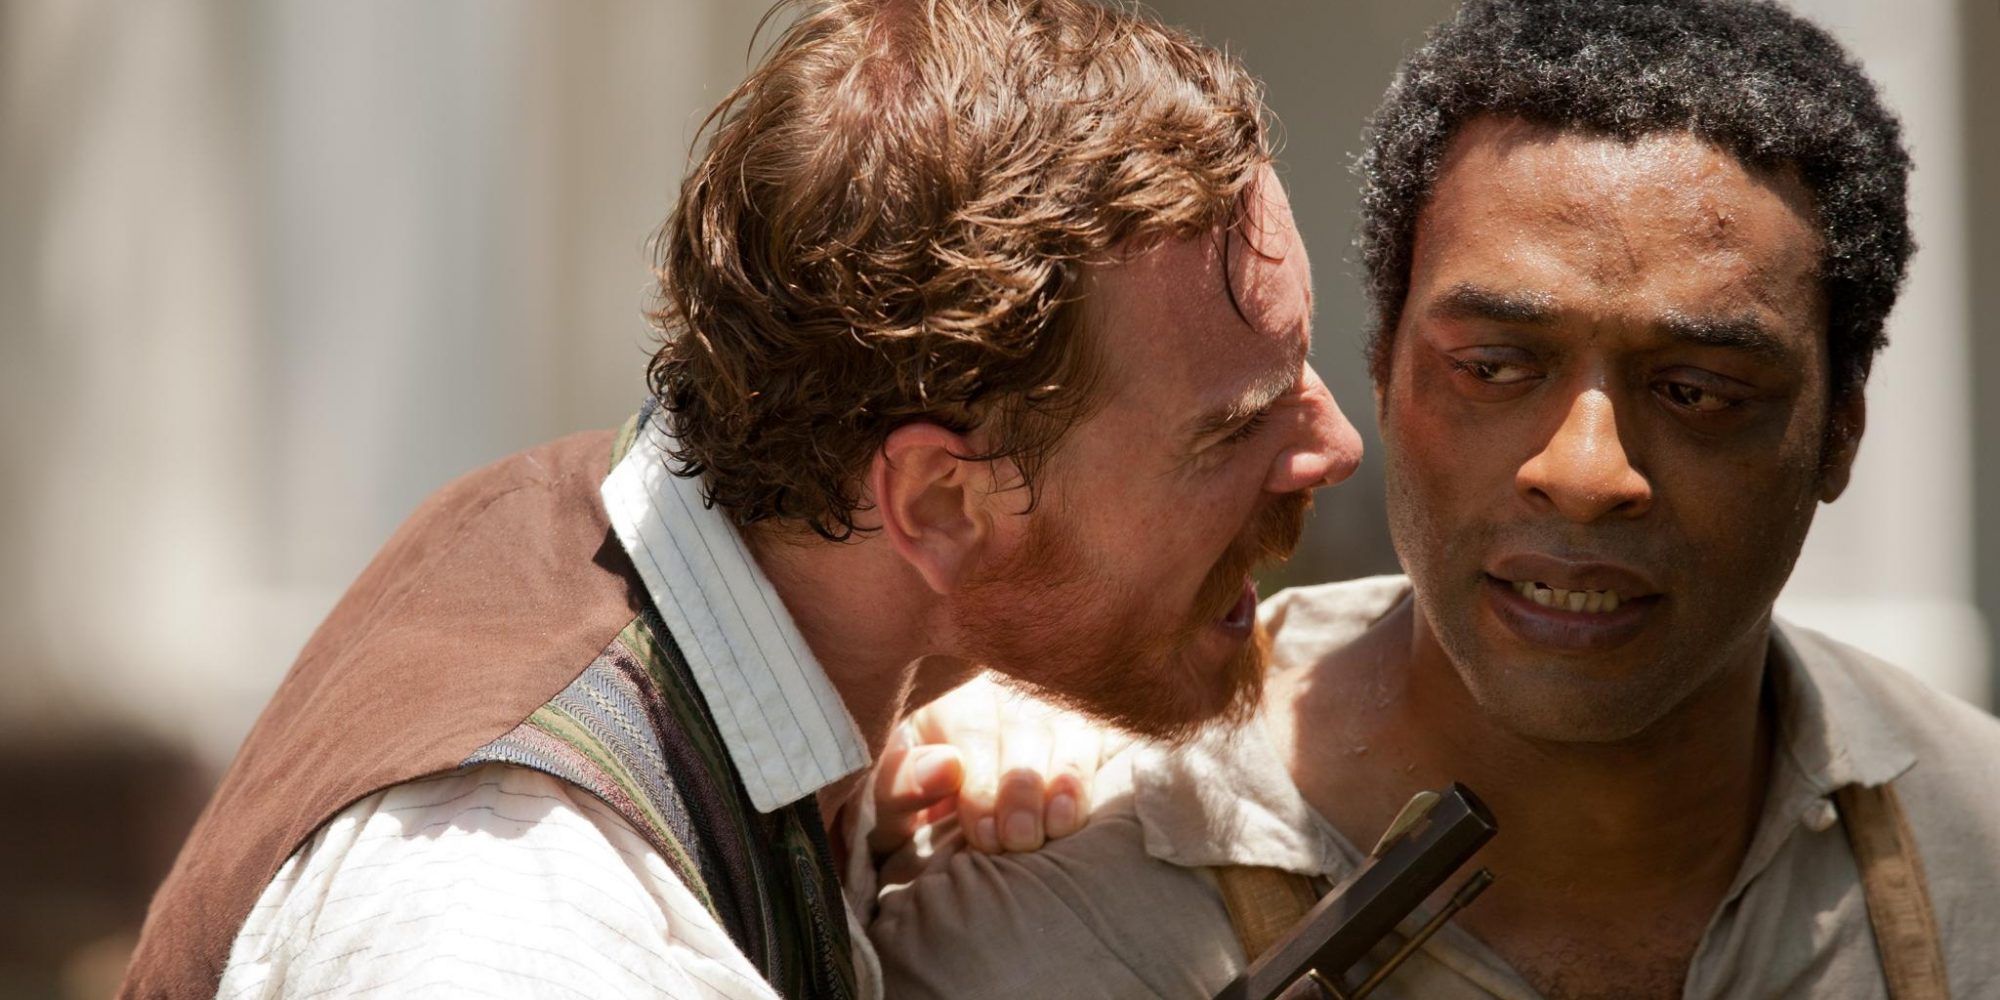 A slave master, Michael Fassbender, screams at a slave, Chiwetel Ejiofor in 12 Years a Slave